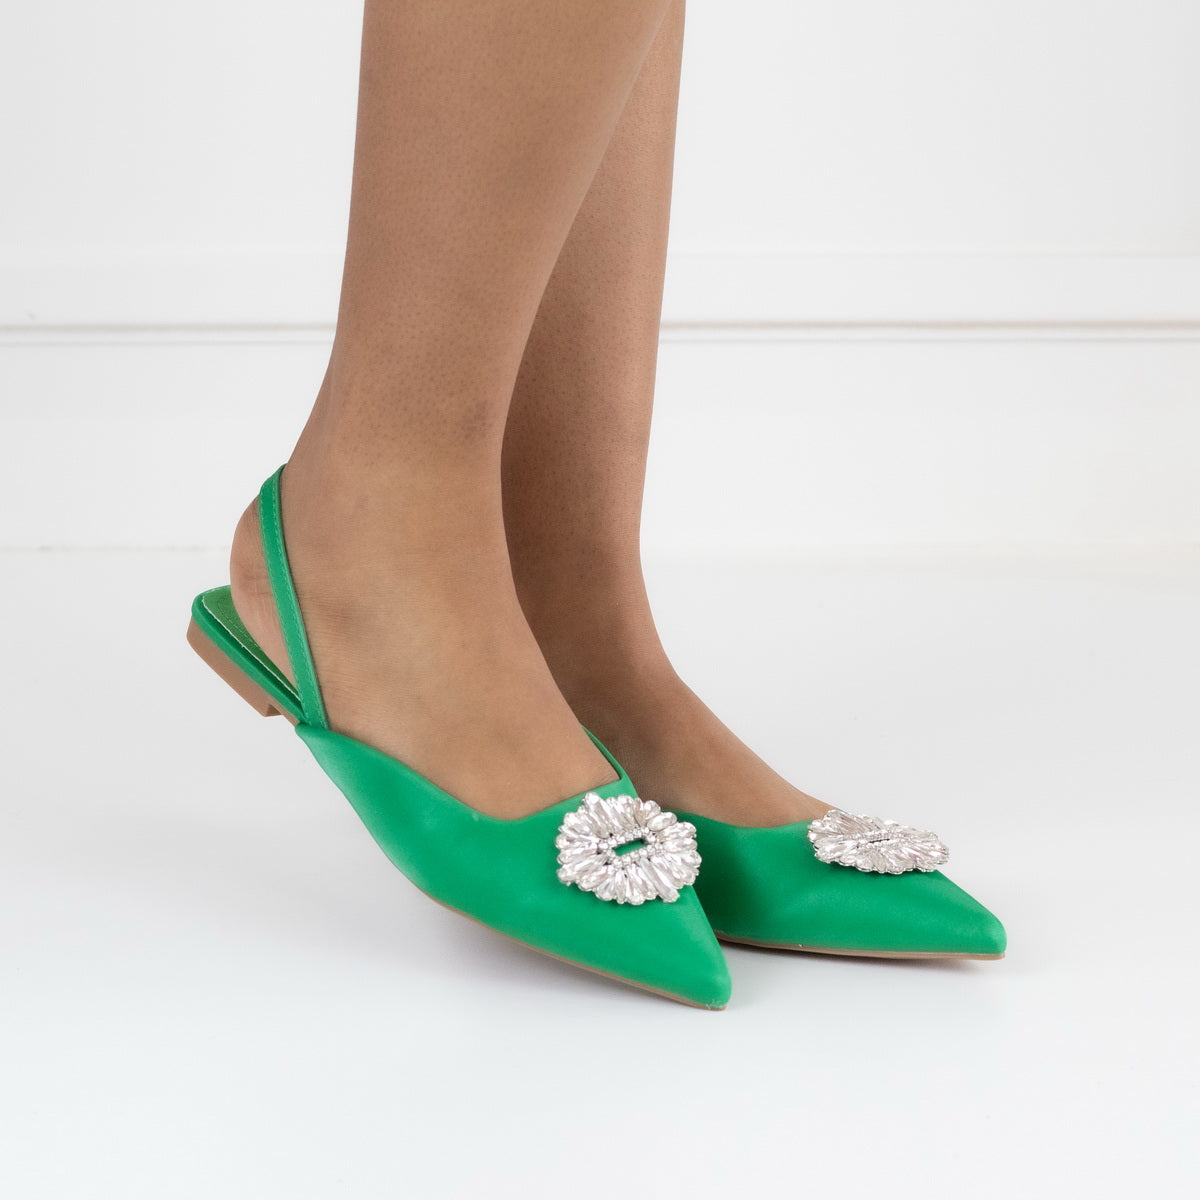 Green pointy sling back pump with a trim erina